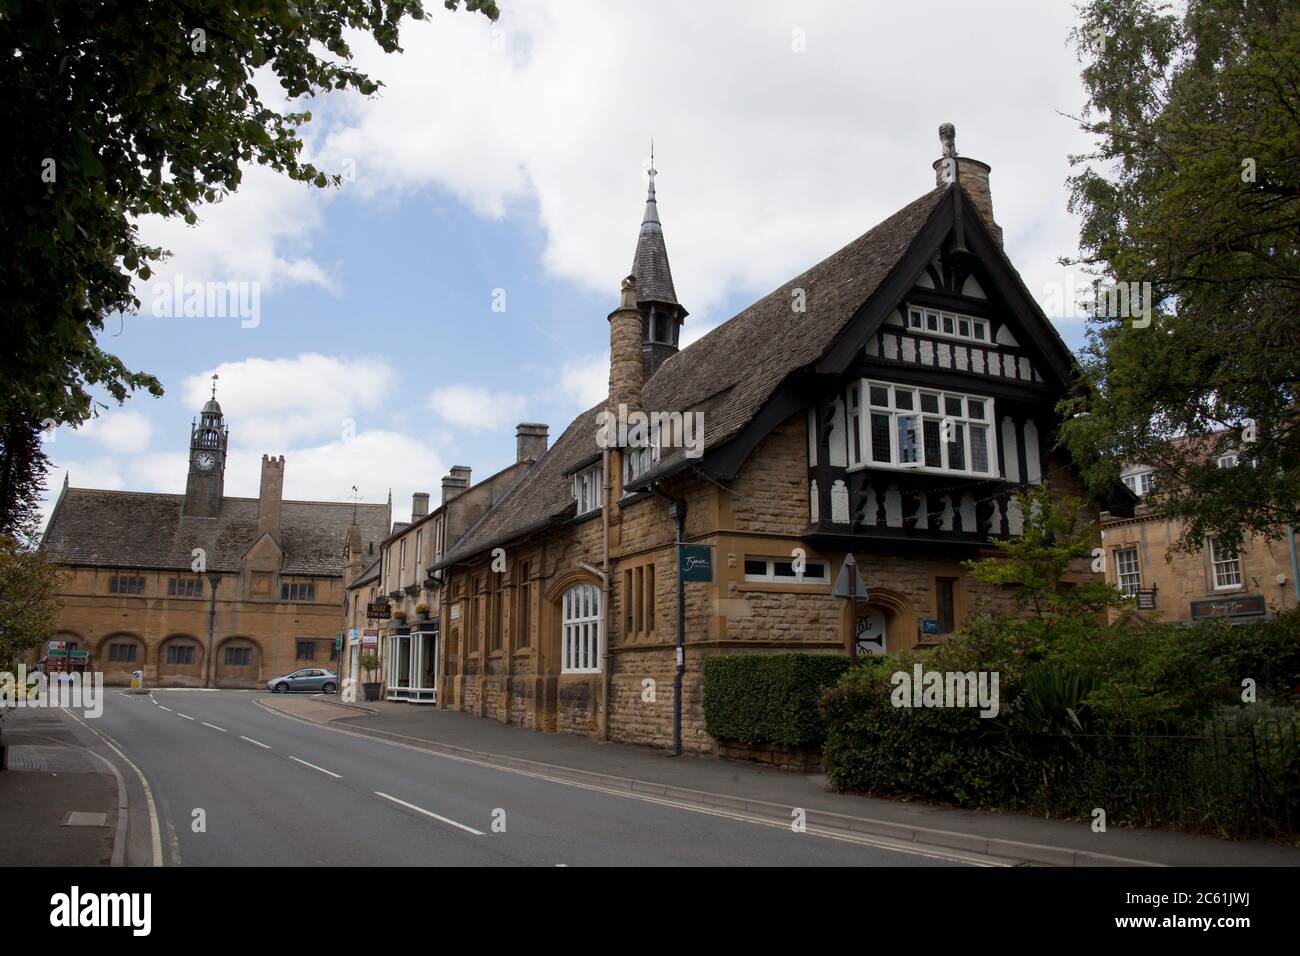 Views of Moreton in Marsh, Gloucestershire in the UK Stock Photo